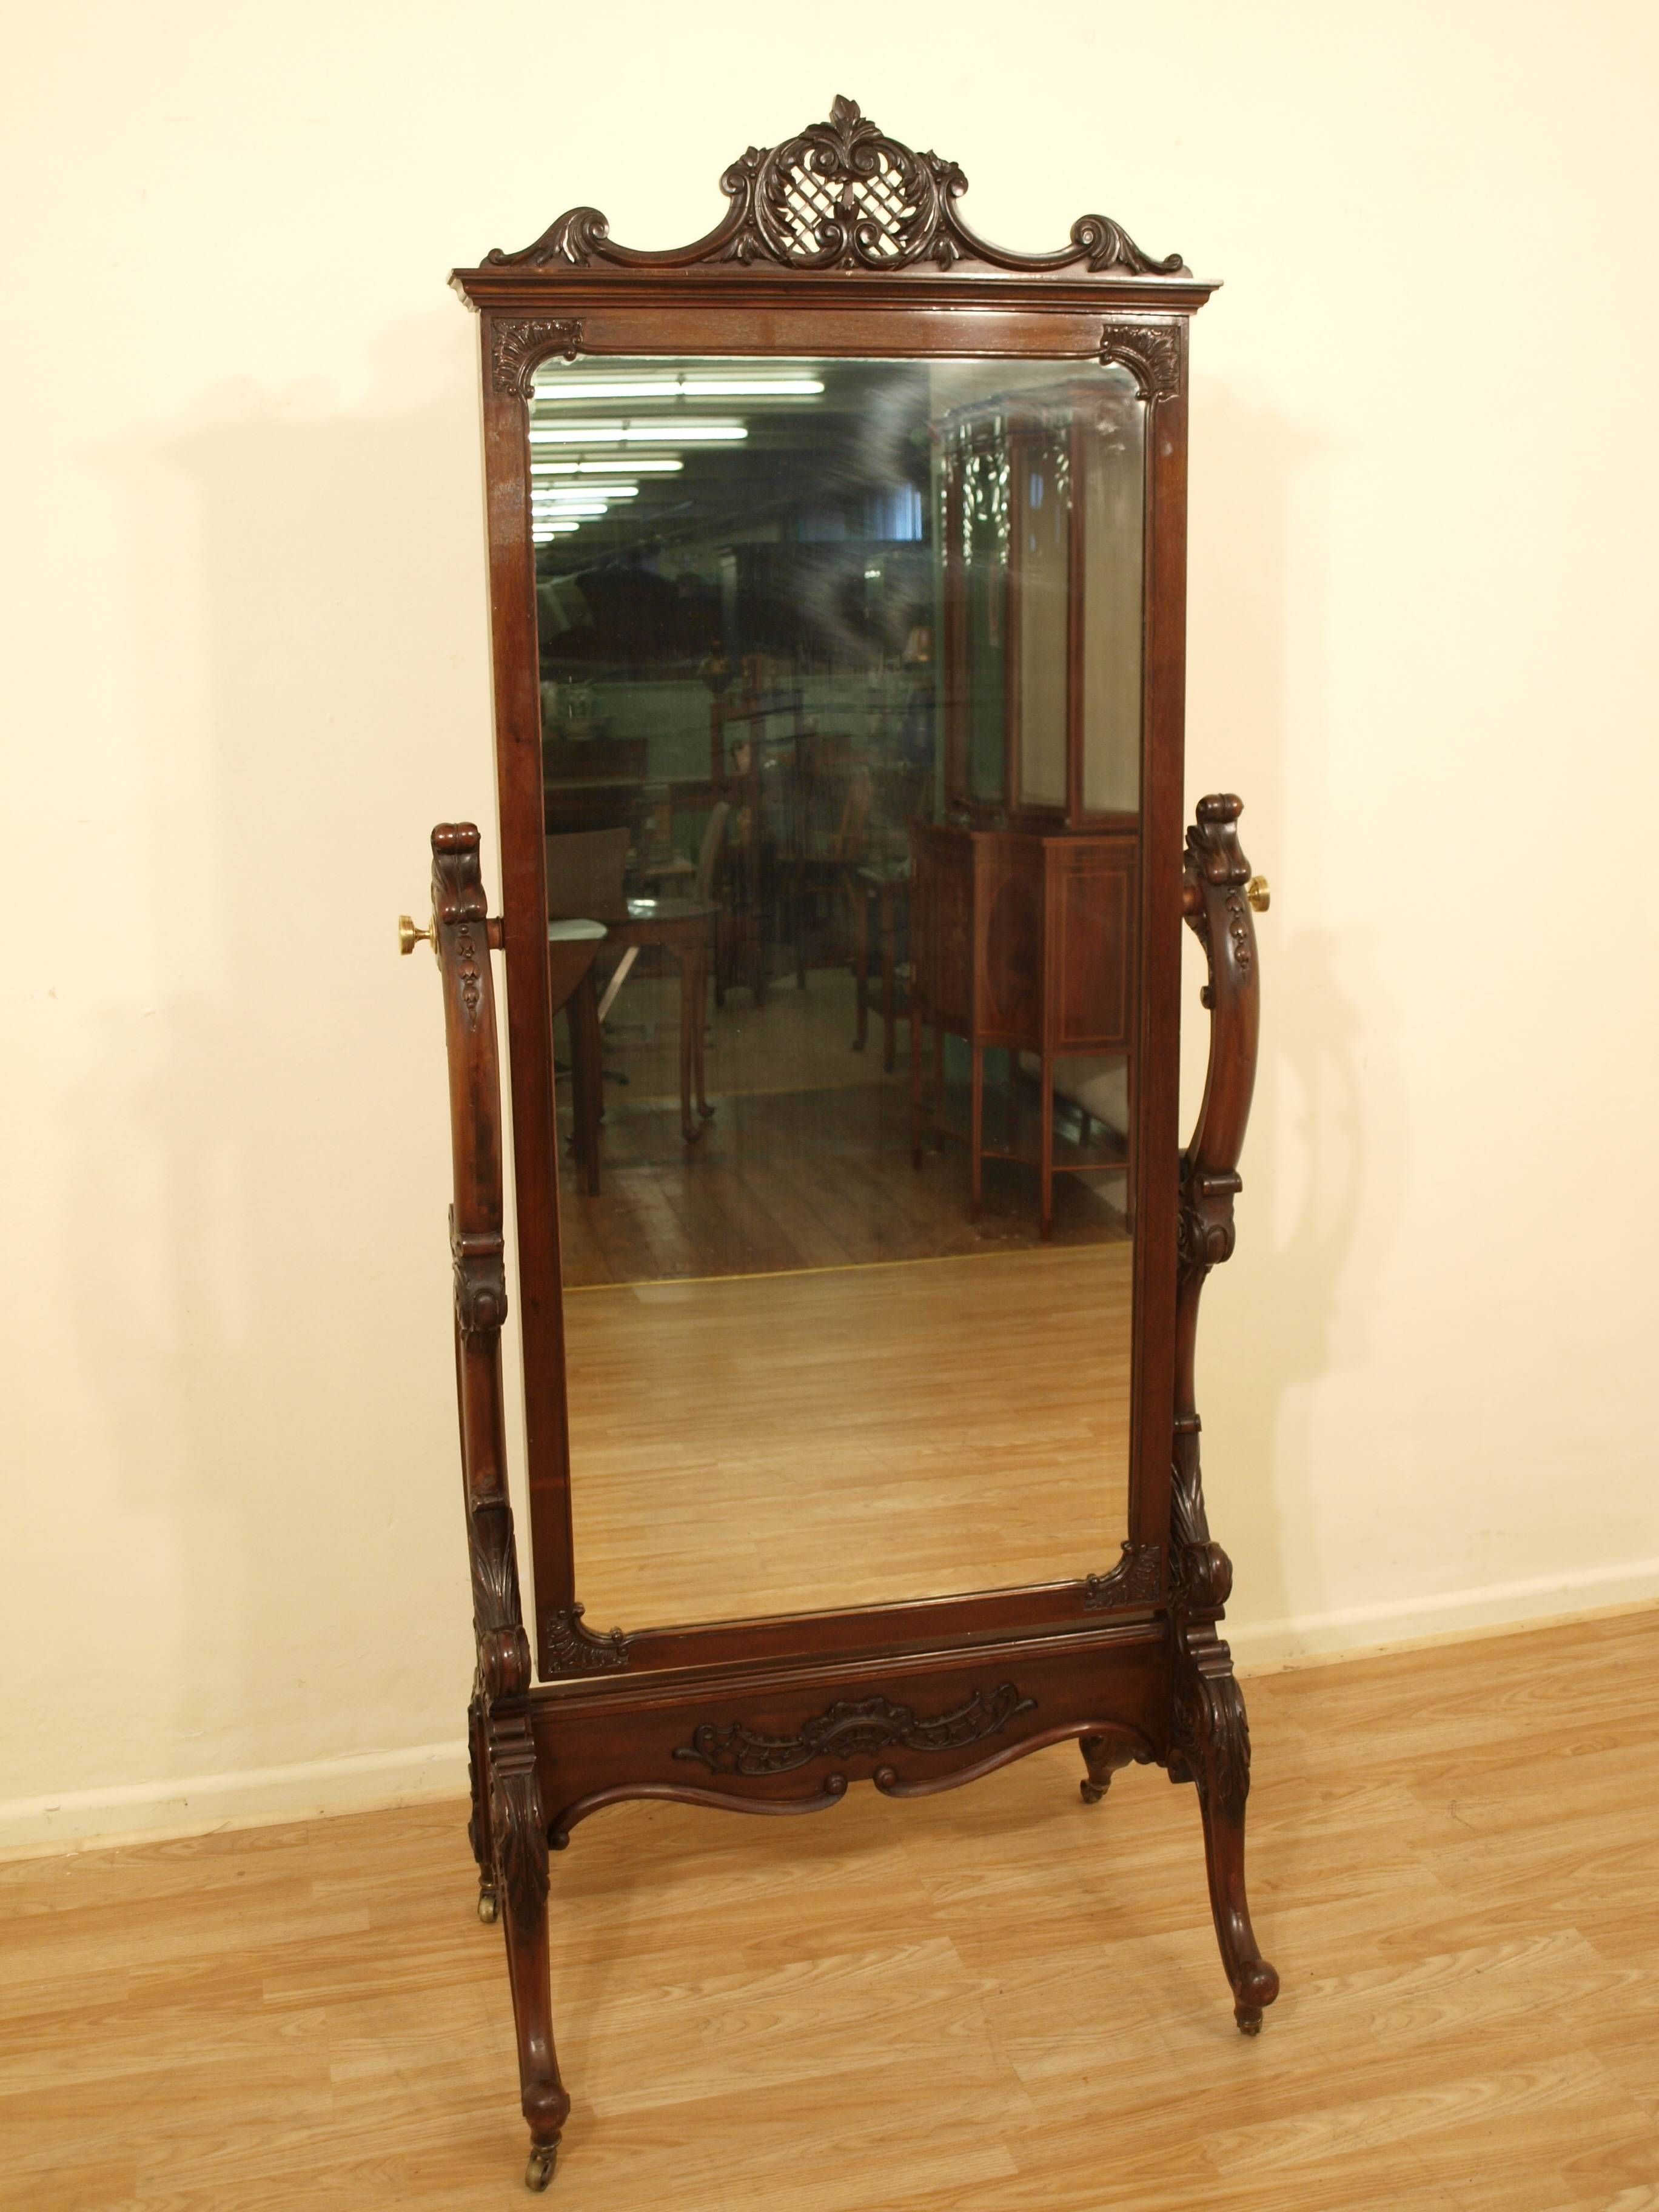 Antique Cheval Mirrors | Christian Davies Antiques With Cheval Freestanding Mirrors (View 14 of 15)